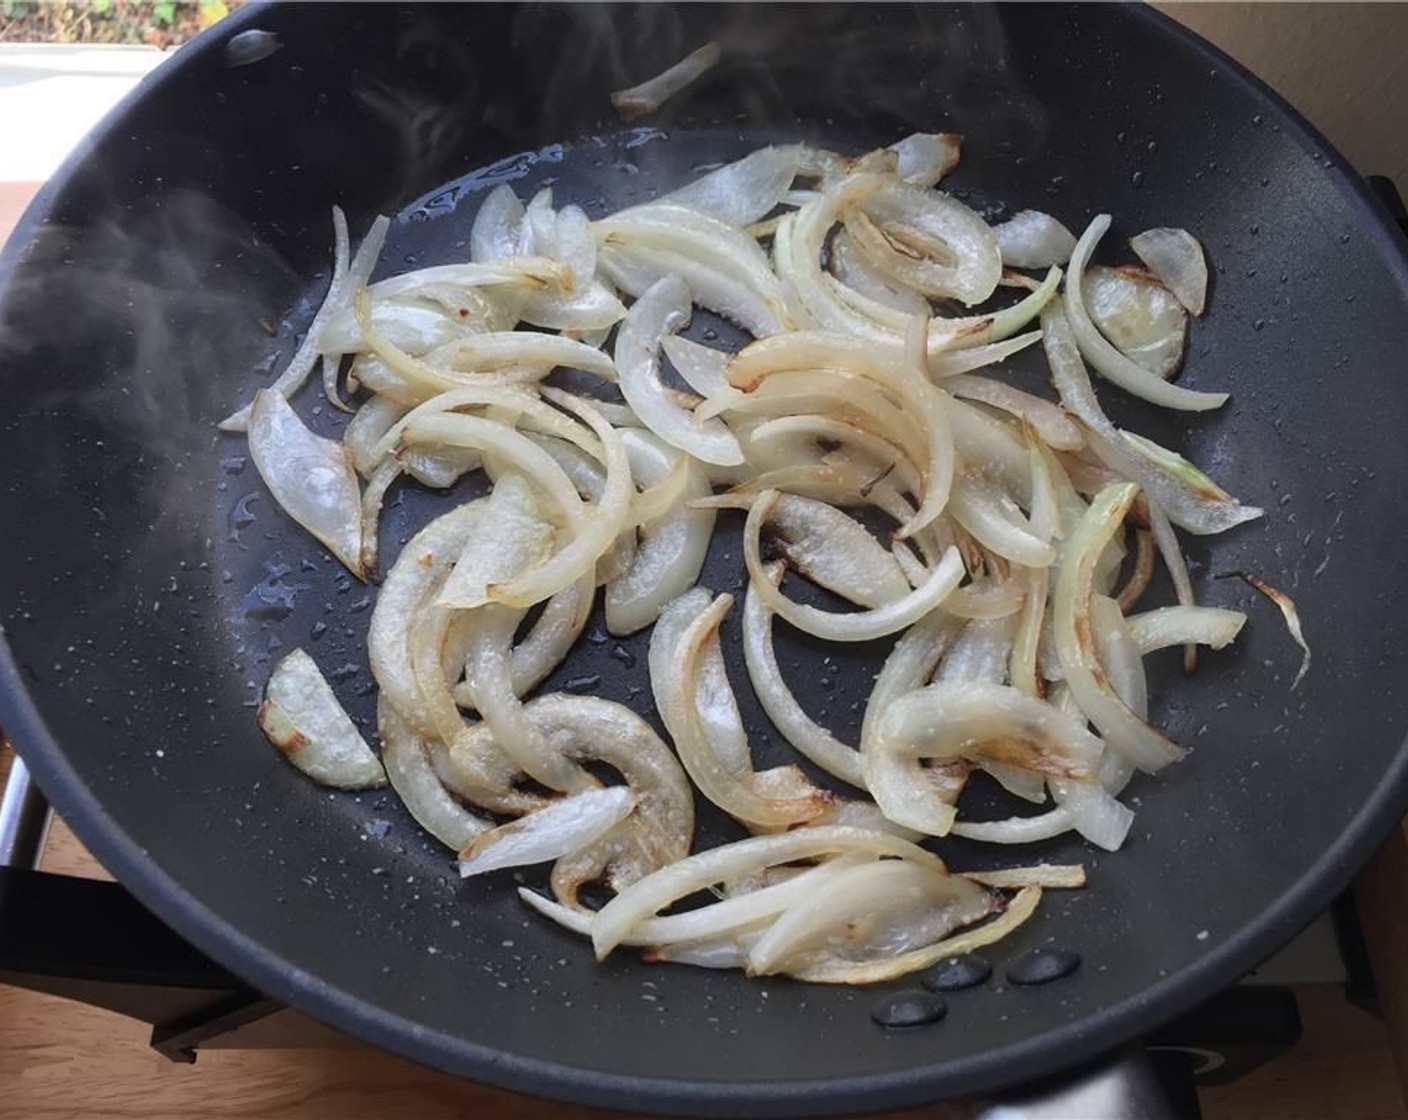 step 2 To a saute pan over medium-high heat, add the Olive Oil (1 tsp) and once smoking, add the sliced onion. Toss a few times for 4 to 5 minutes to get some color on them. If the pan seems too hot, lower to medium.